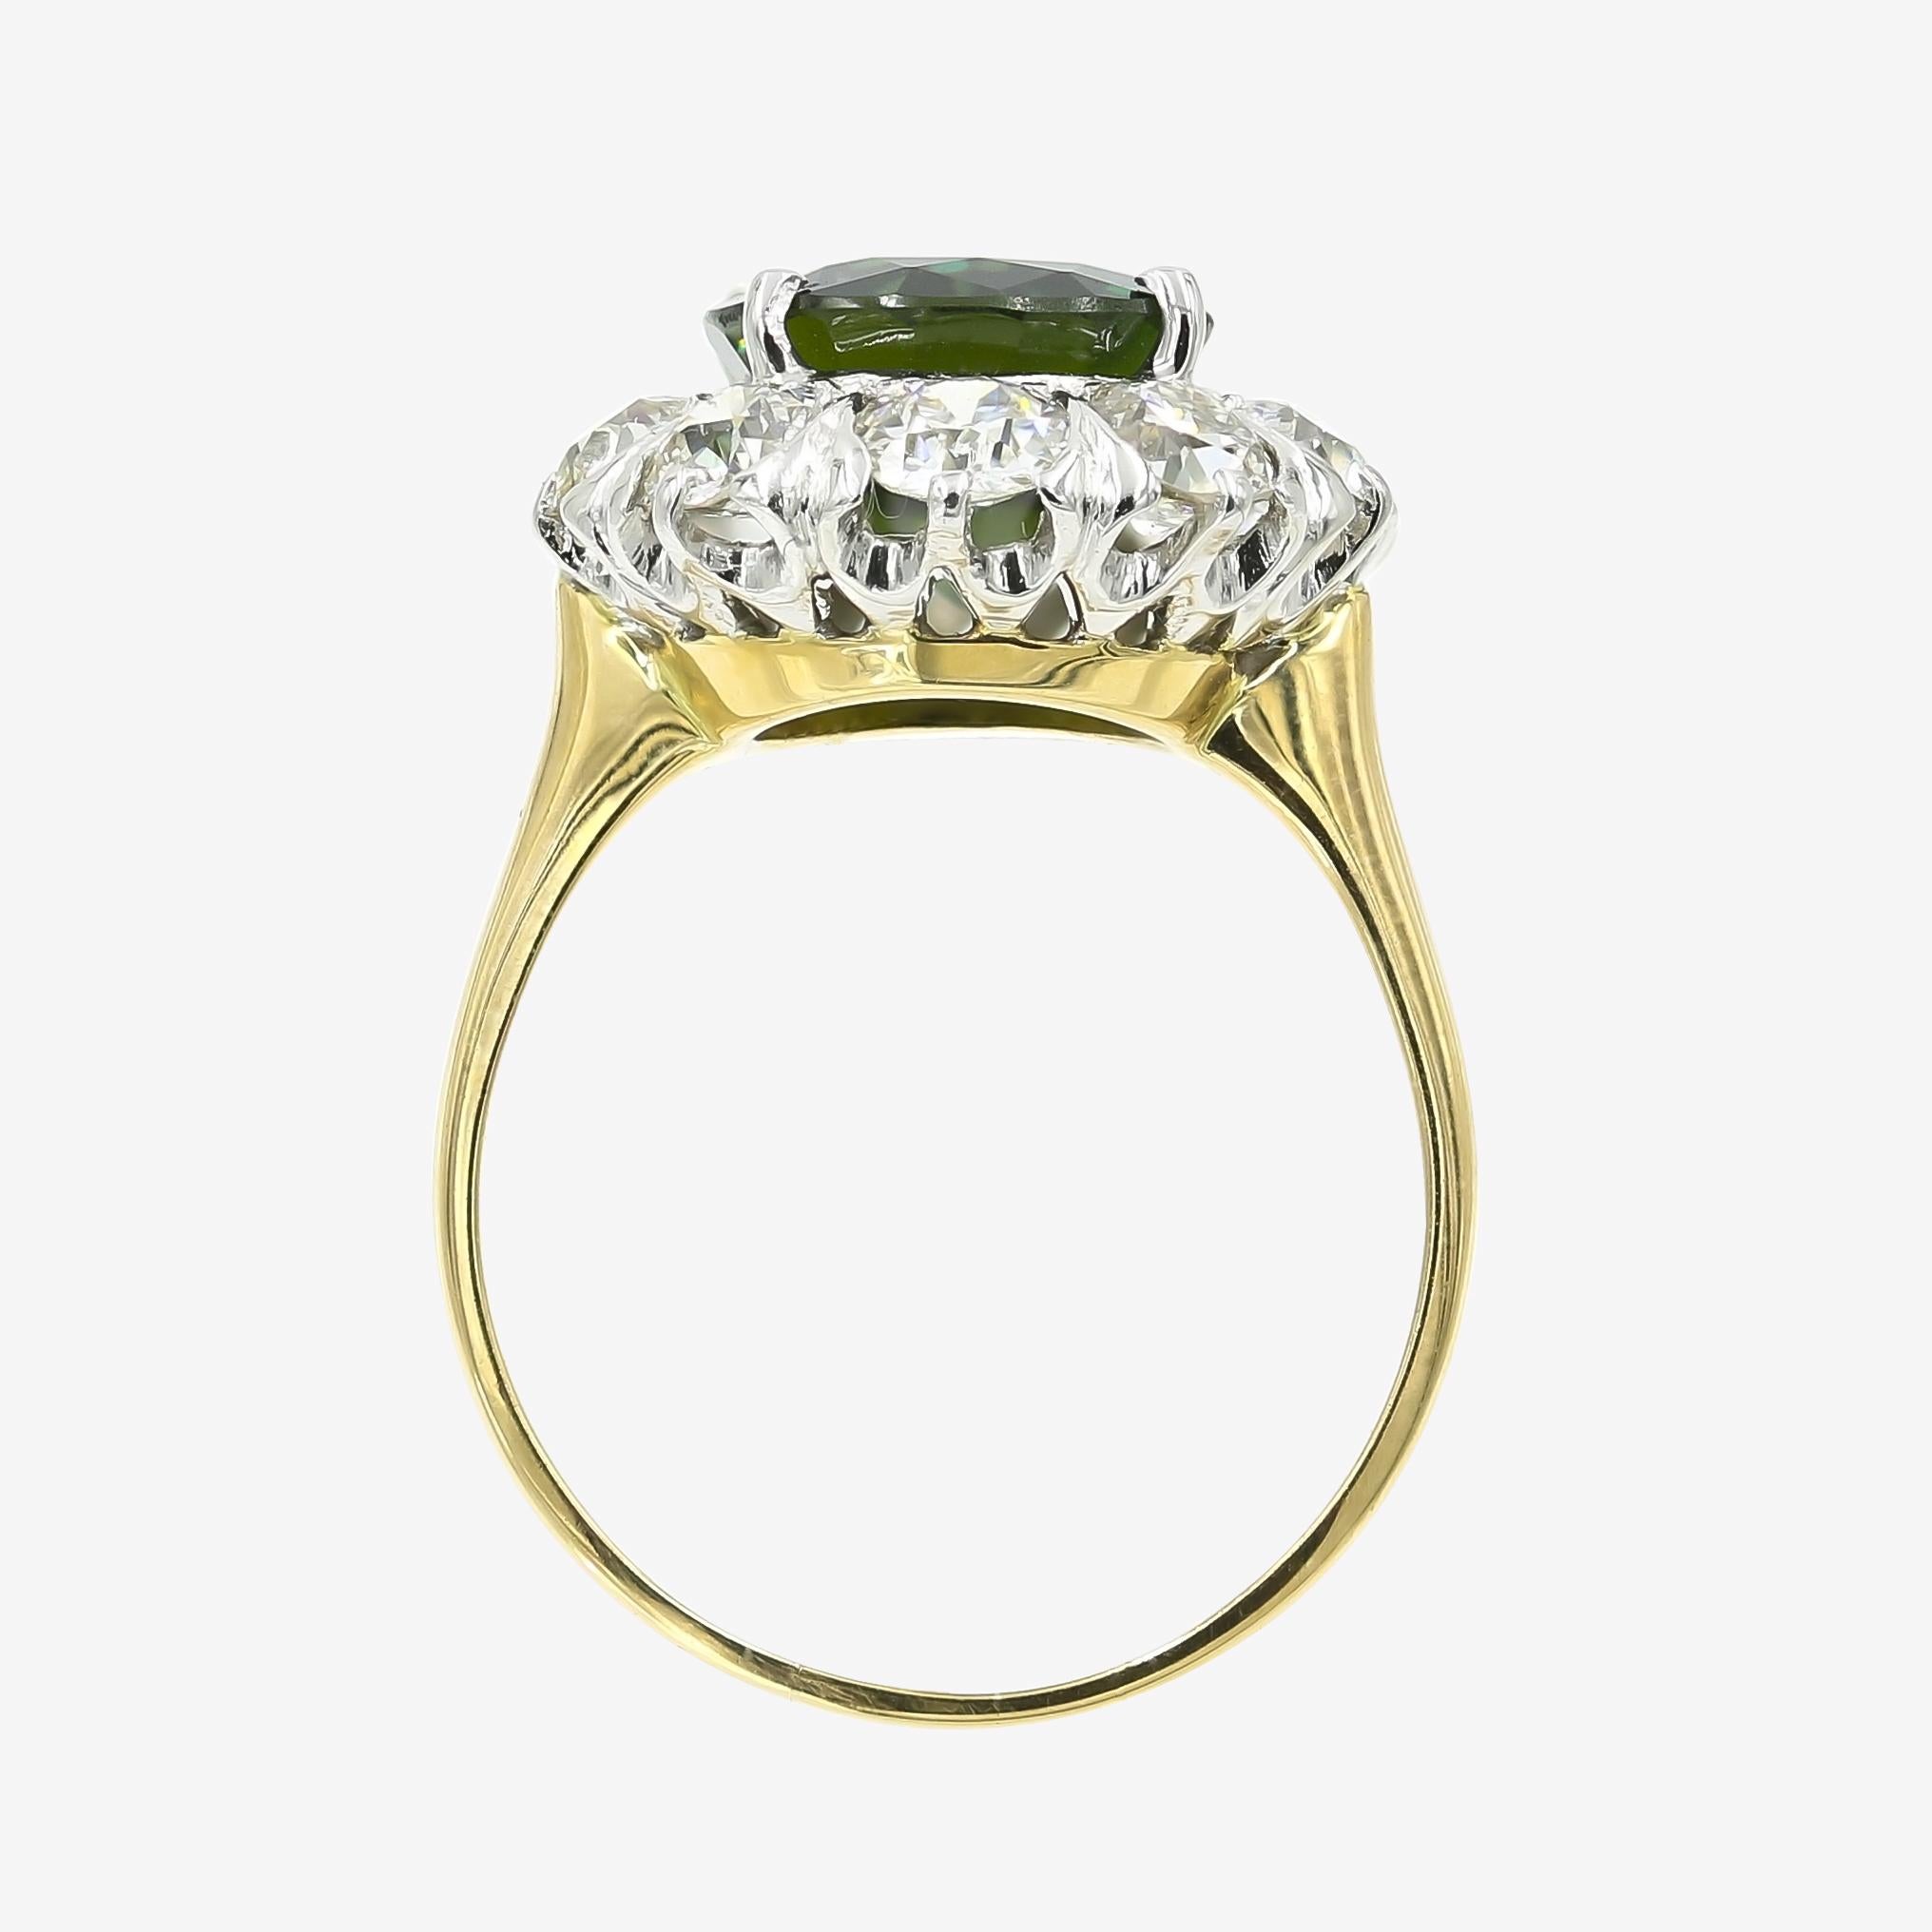 4.75cts. Oval Cut Green Sapphire & Diamond Ring in 14kt White & Yellow Gold For Sale 1